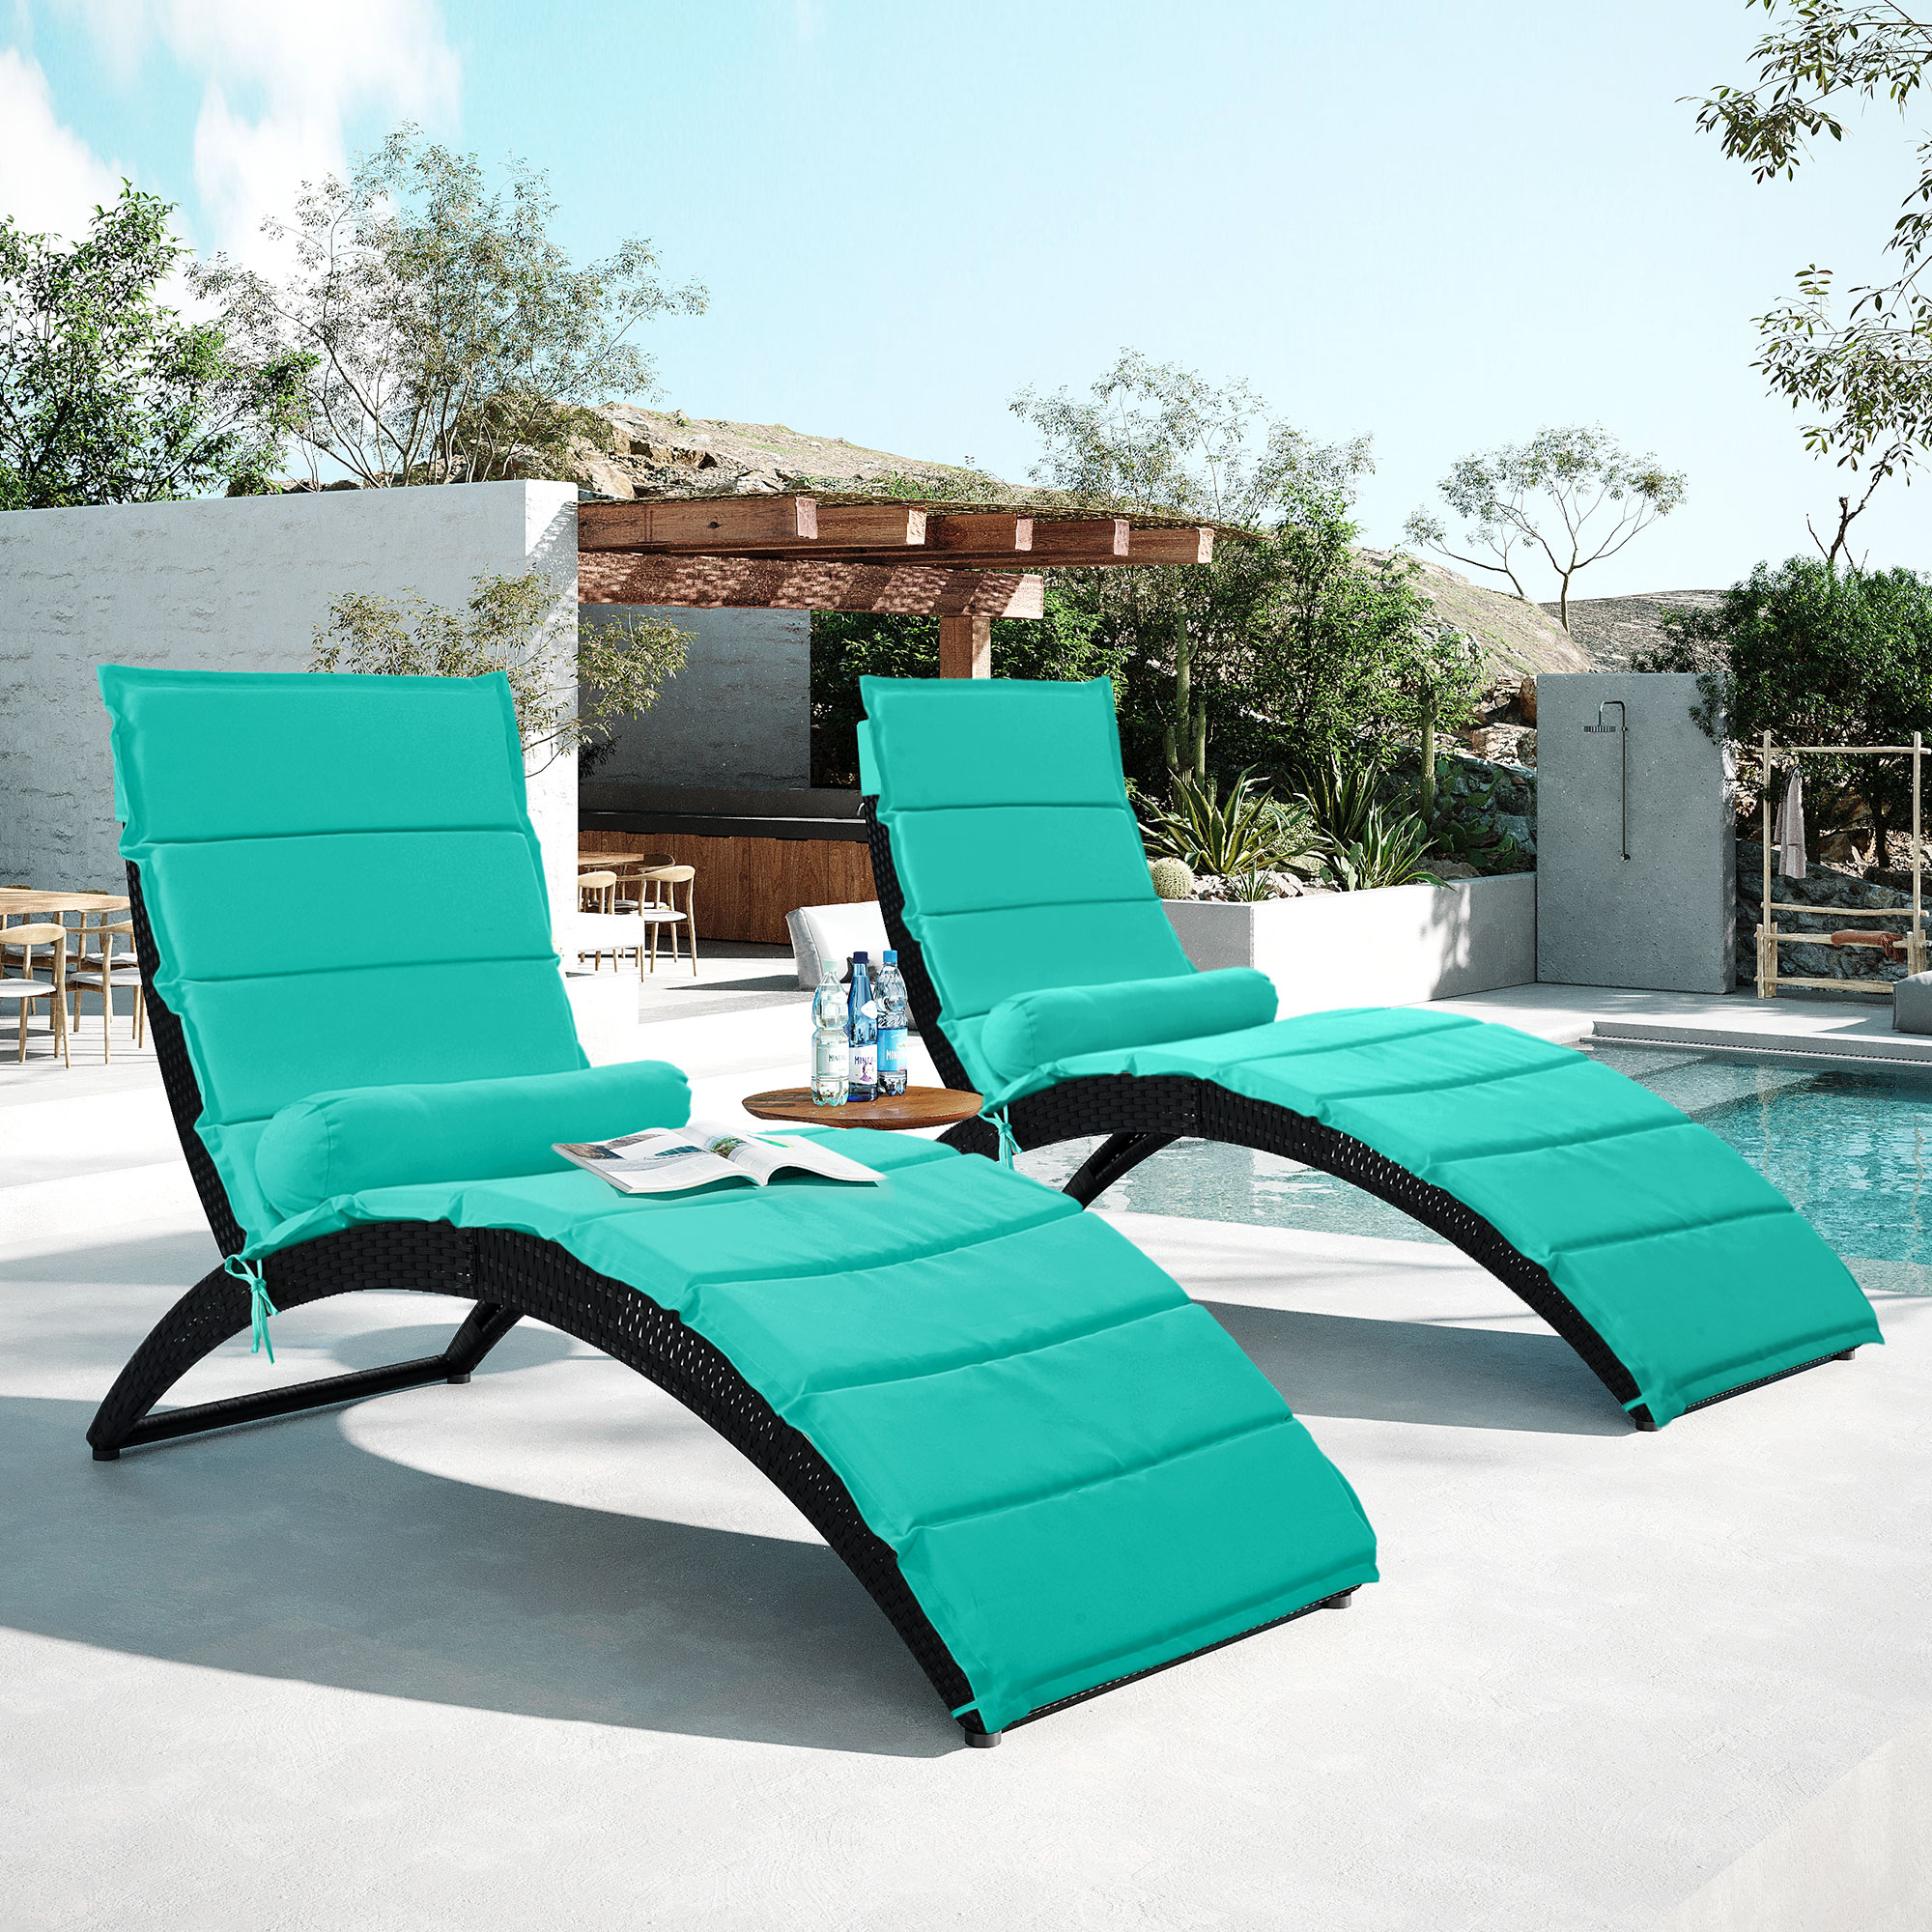 Chaise Lounge Chairs for Outside, 2 Pieces PE Wicker Foldable Reclining Chairs, Patio Sun Lounger with Removable Cushions, Rattan Chaise Chair for Poolside, Garden, Backyard, Greenish-blue, D8595 - image 2 of 10